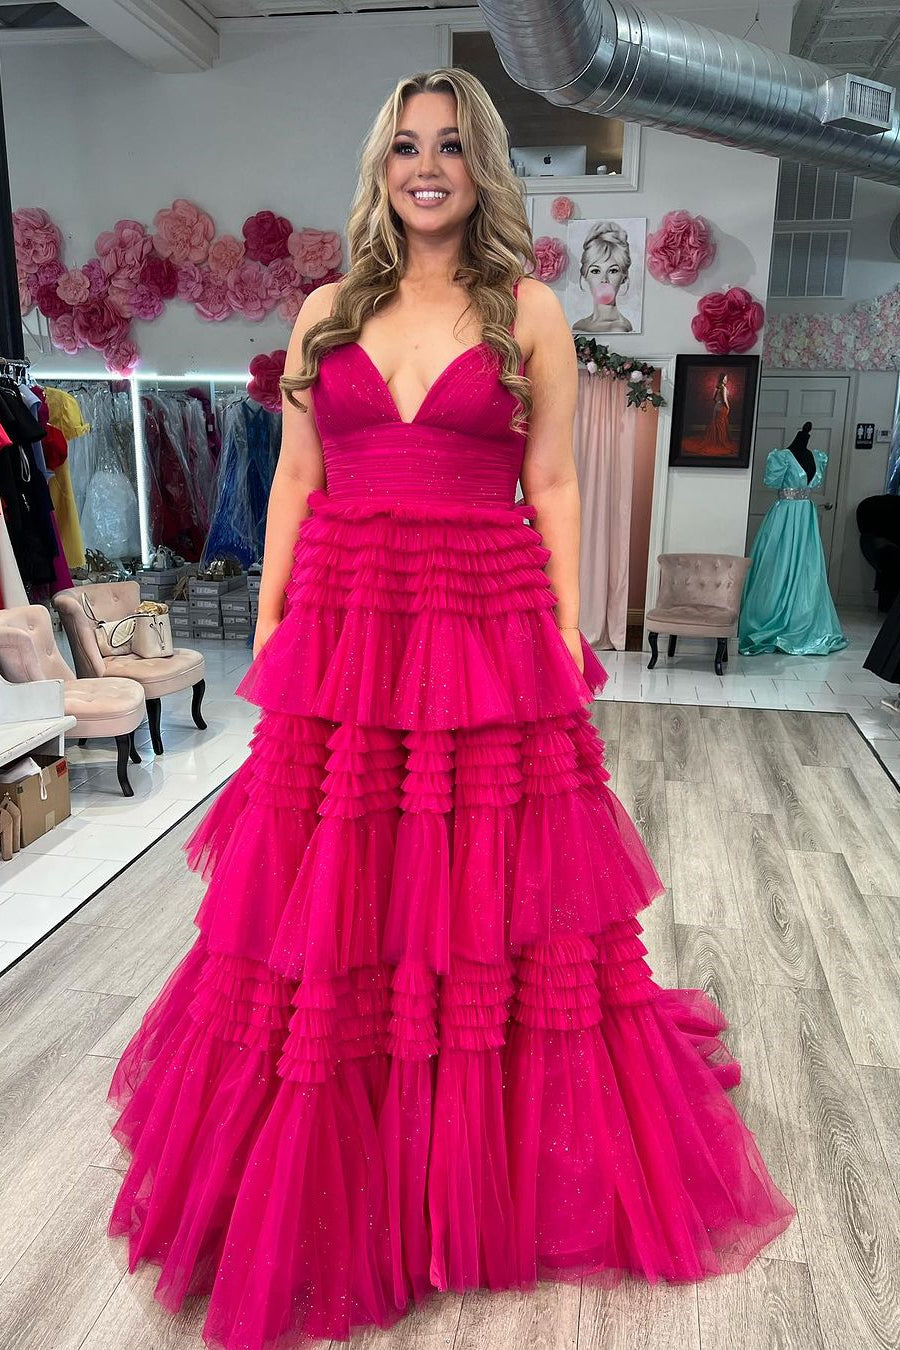 Elegant Dusty Pink Organza Evening Gowns With Slits With One Shoulder And  High Split 2021 Dubai Formal Gown For Parties, Proms, And Arabic Middle  Eastern Events From Verycute, $37.81 | DHgate.Com